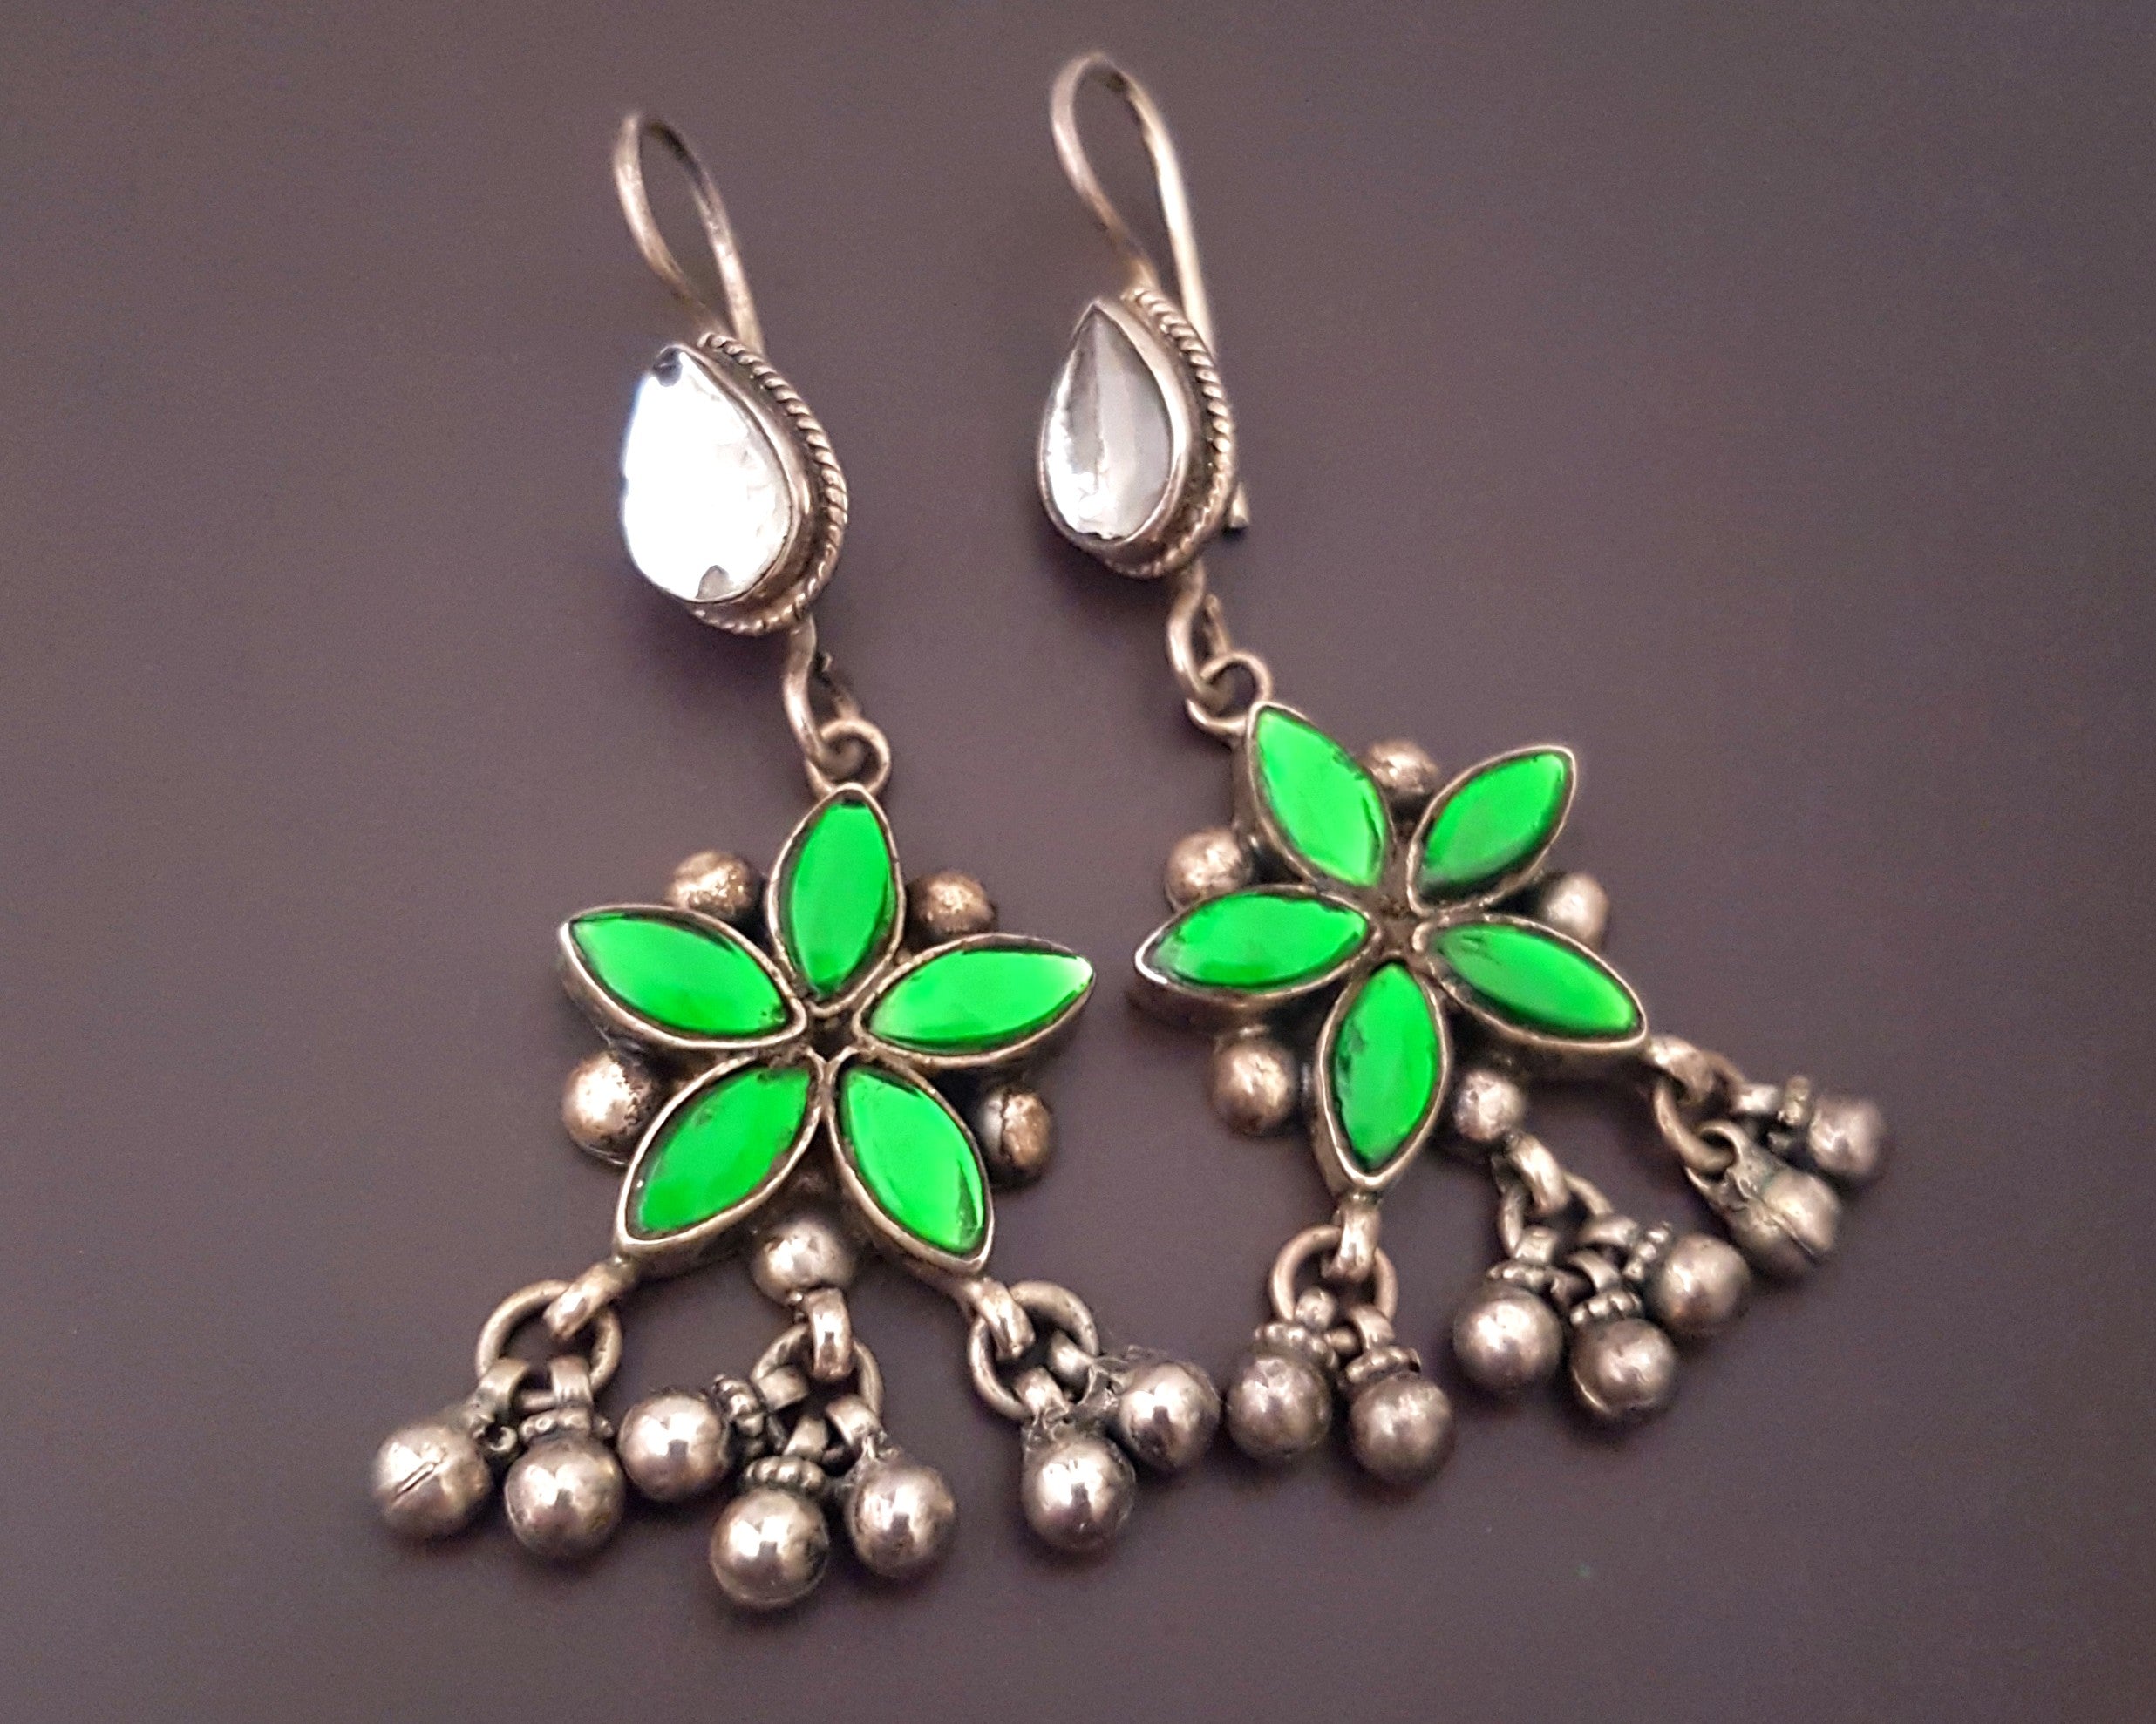 Rajasthani Earrings with Green and White Glass